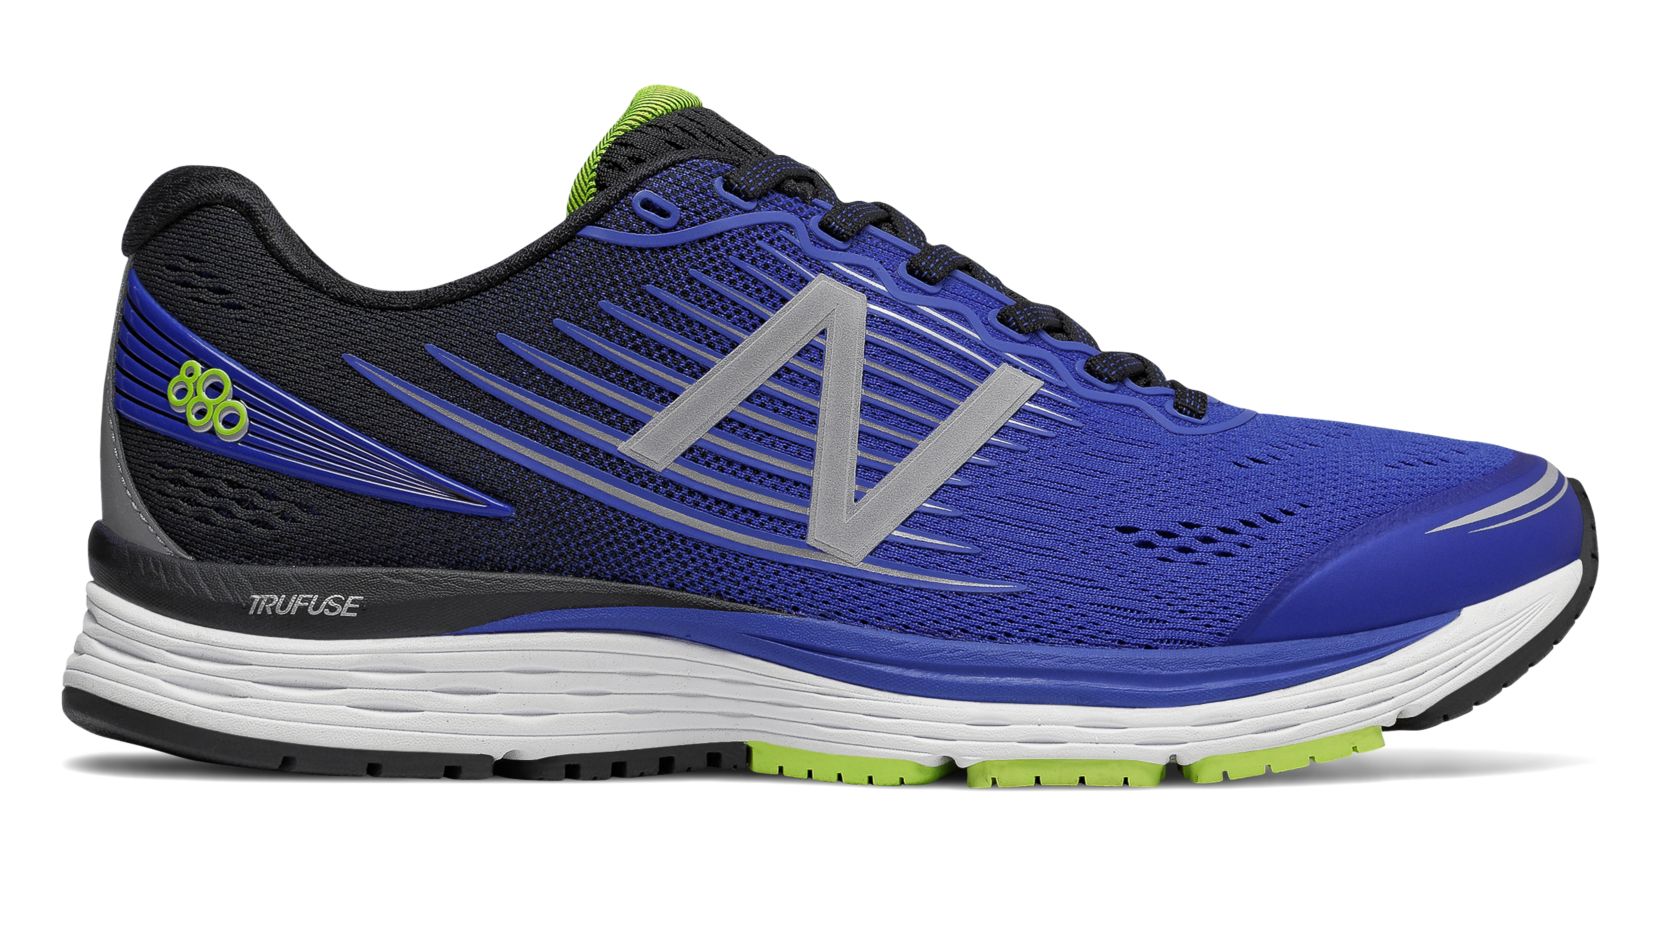 The New Balance 880v8 Has Arrived! | Running & Walking Outfitters